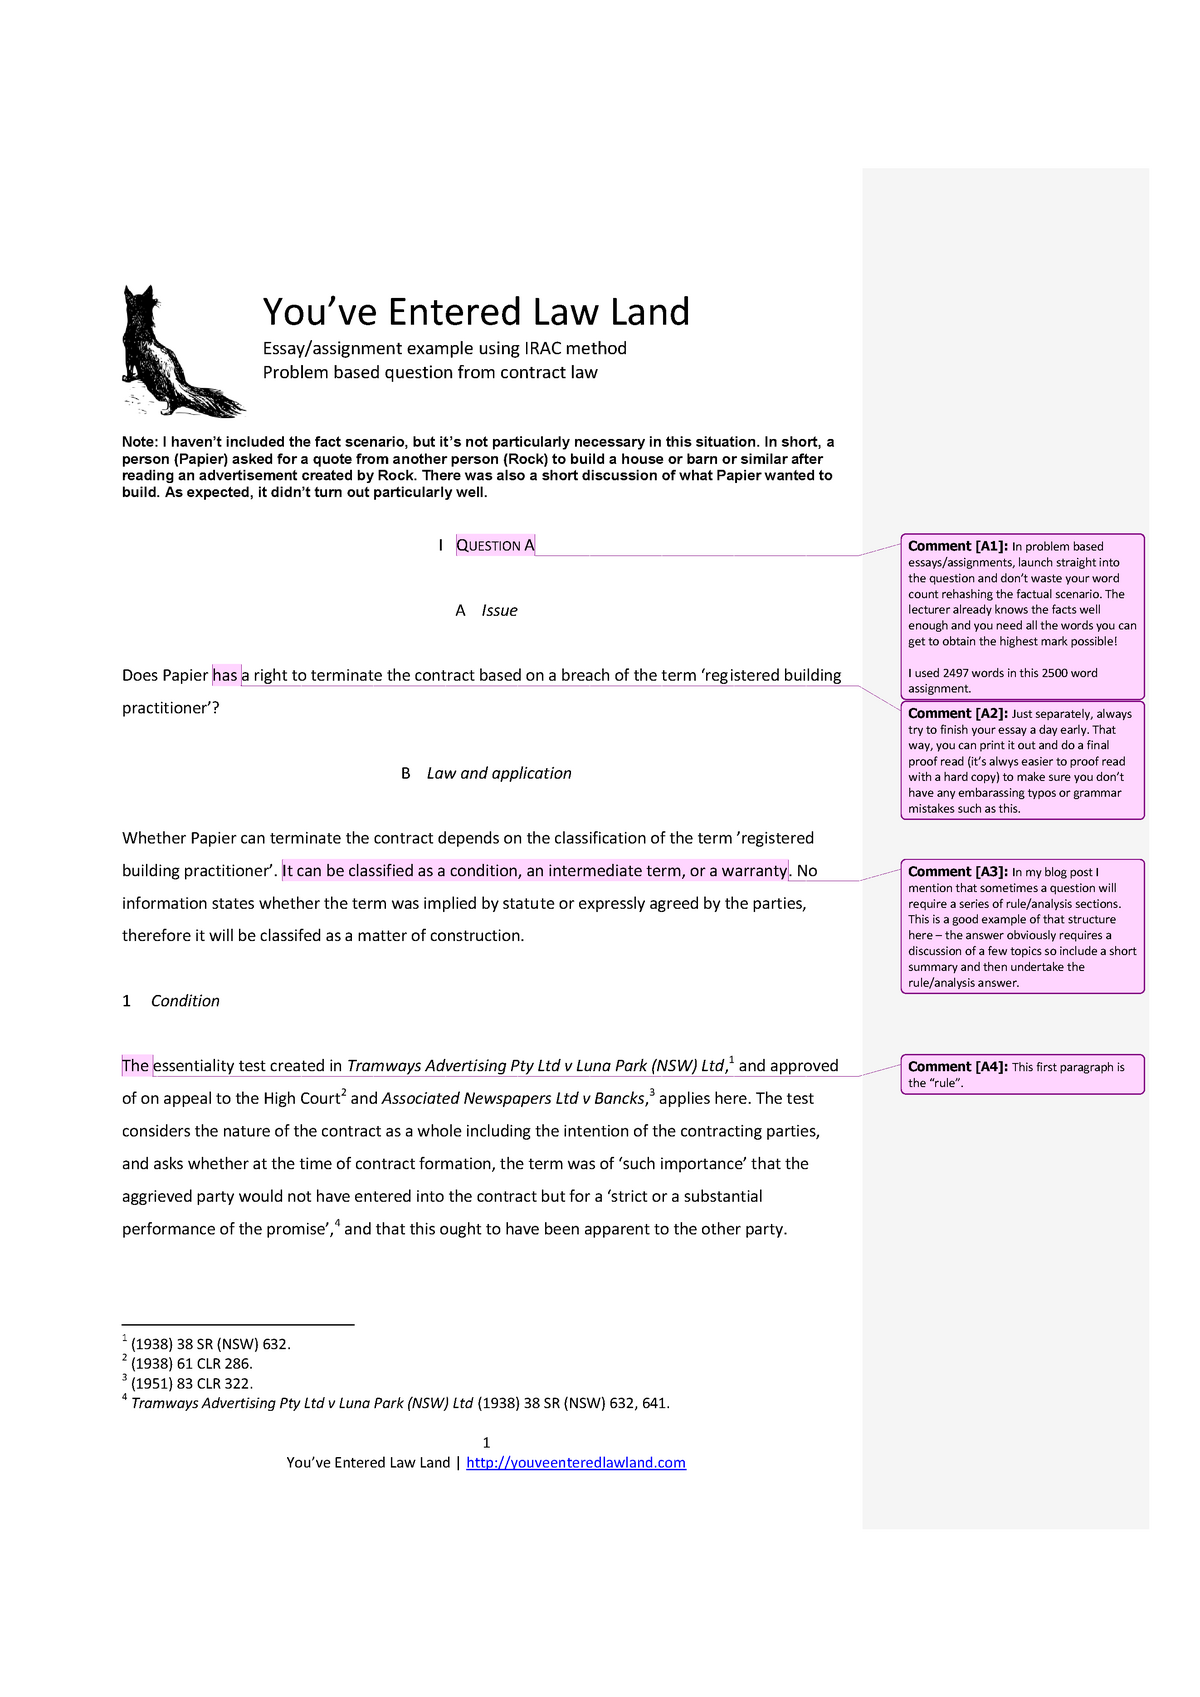 Need help with legislation essays-produce an incident examination in-law composition IRAC method